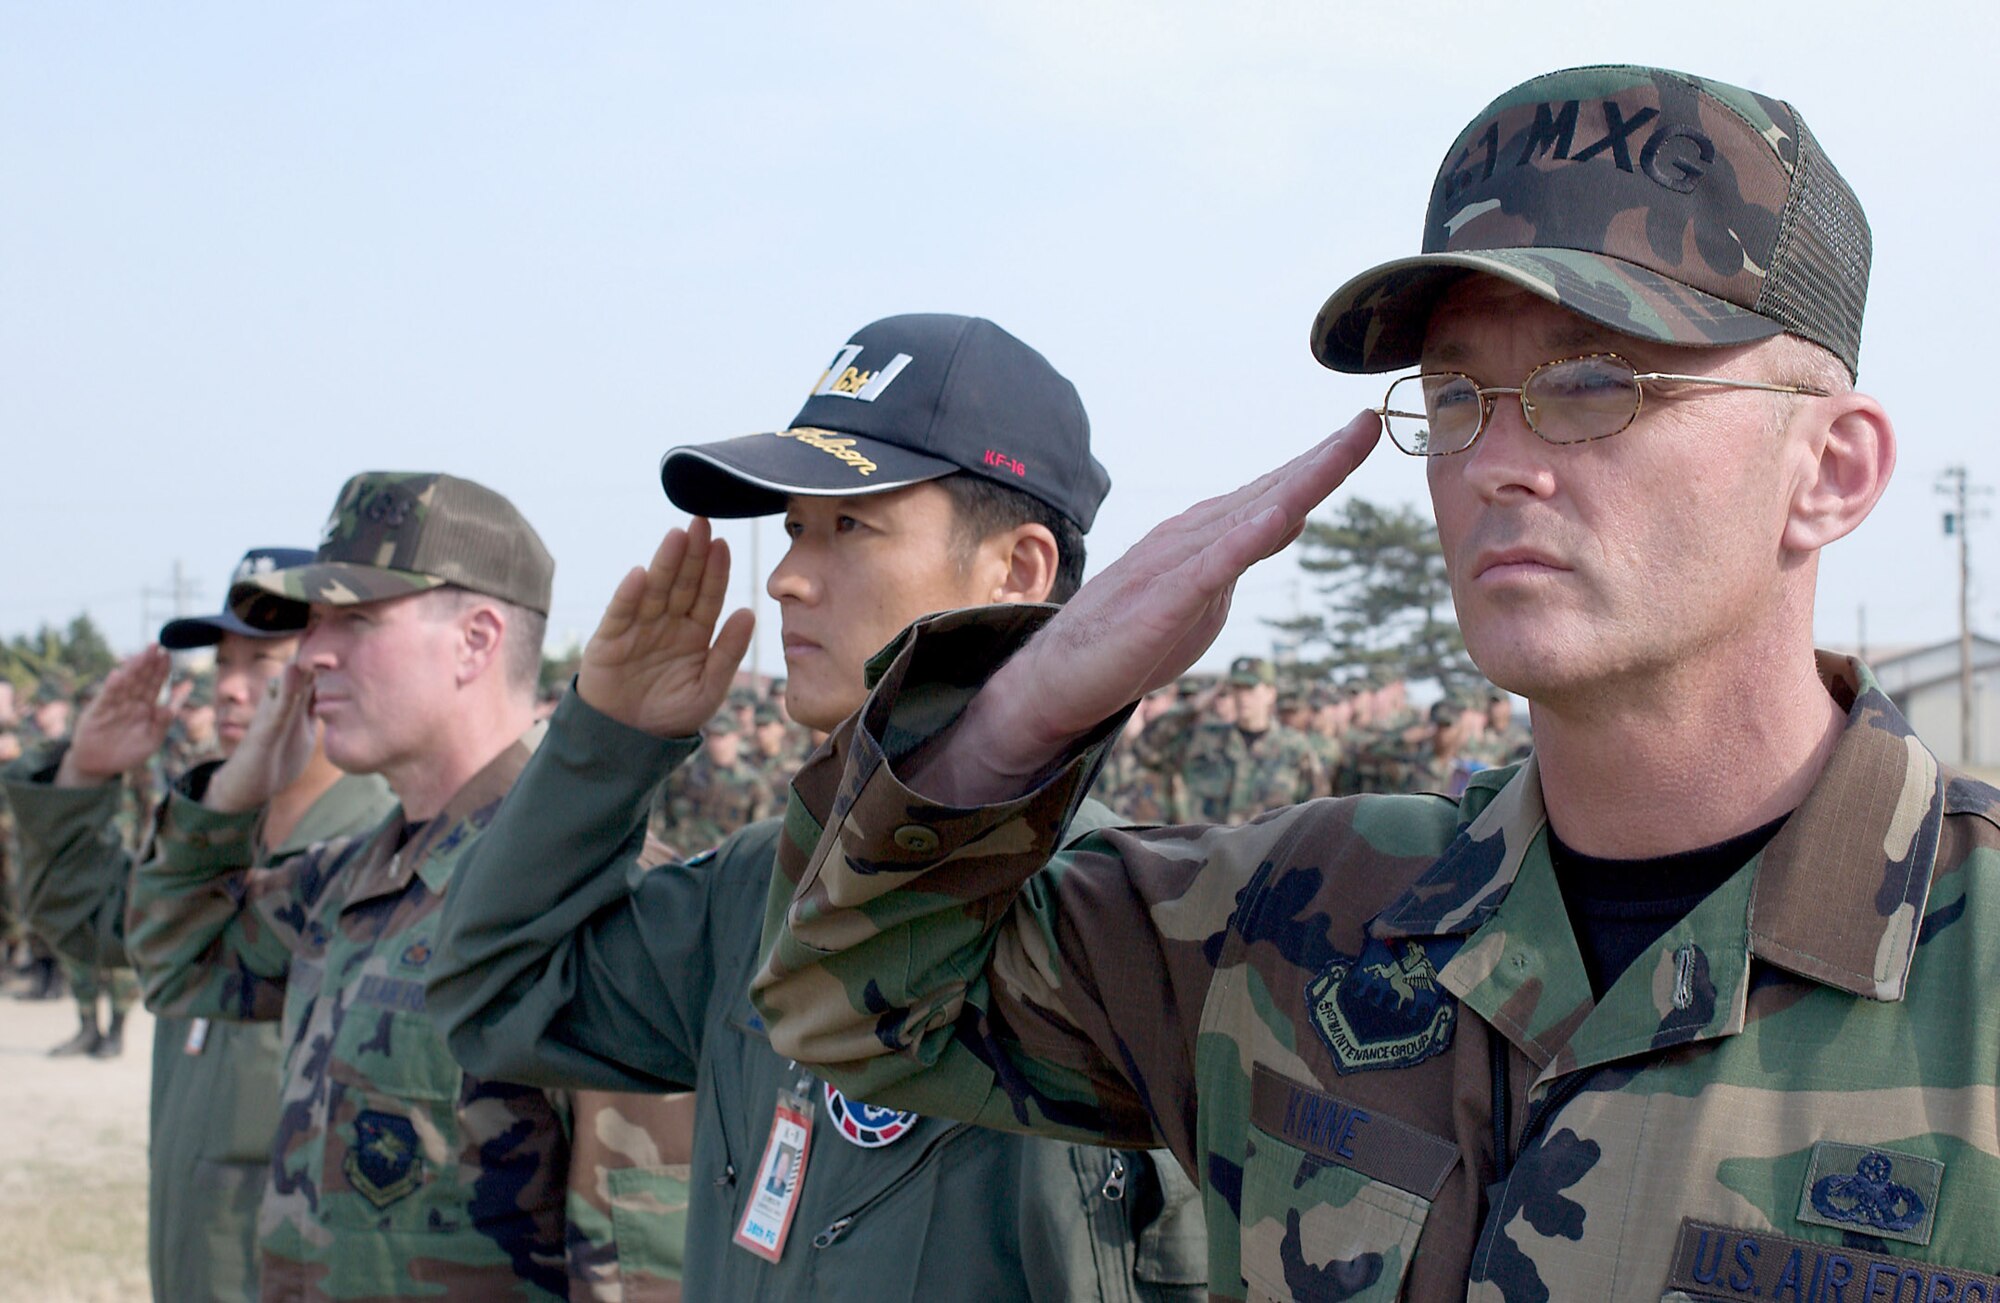 Airmen from the 51st Maintenance Group at Osan Air Base, South Korea, and members of the Republic of Korea Air Force take part in a retreat ceremony June 19 at Kunsan Air Base, South Korea, that was part of the 8th Fighter Wing's commemoration event to honor the memory of Brig. Gen. Robin Olds, who recently passed away.  General Olds was a triple ace fighter pilot in World War II and Vietnam and was a former commander of the then 8th Tactical Fighter Wing at Kunsan.  (U.S. Air Force Photo/Senior Airman Barry Loo)